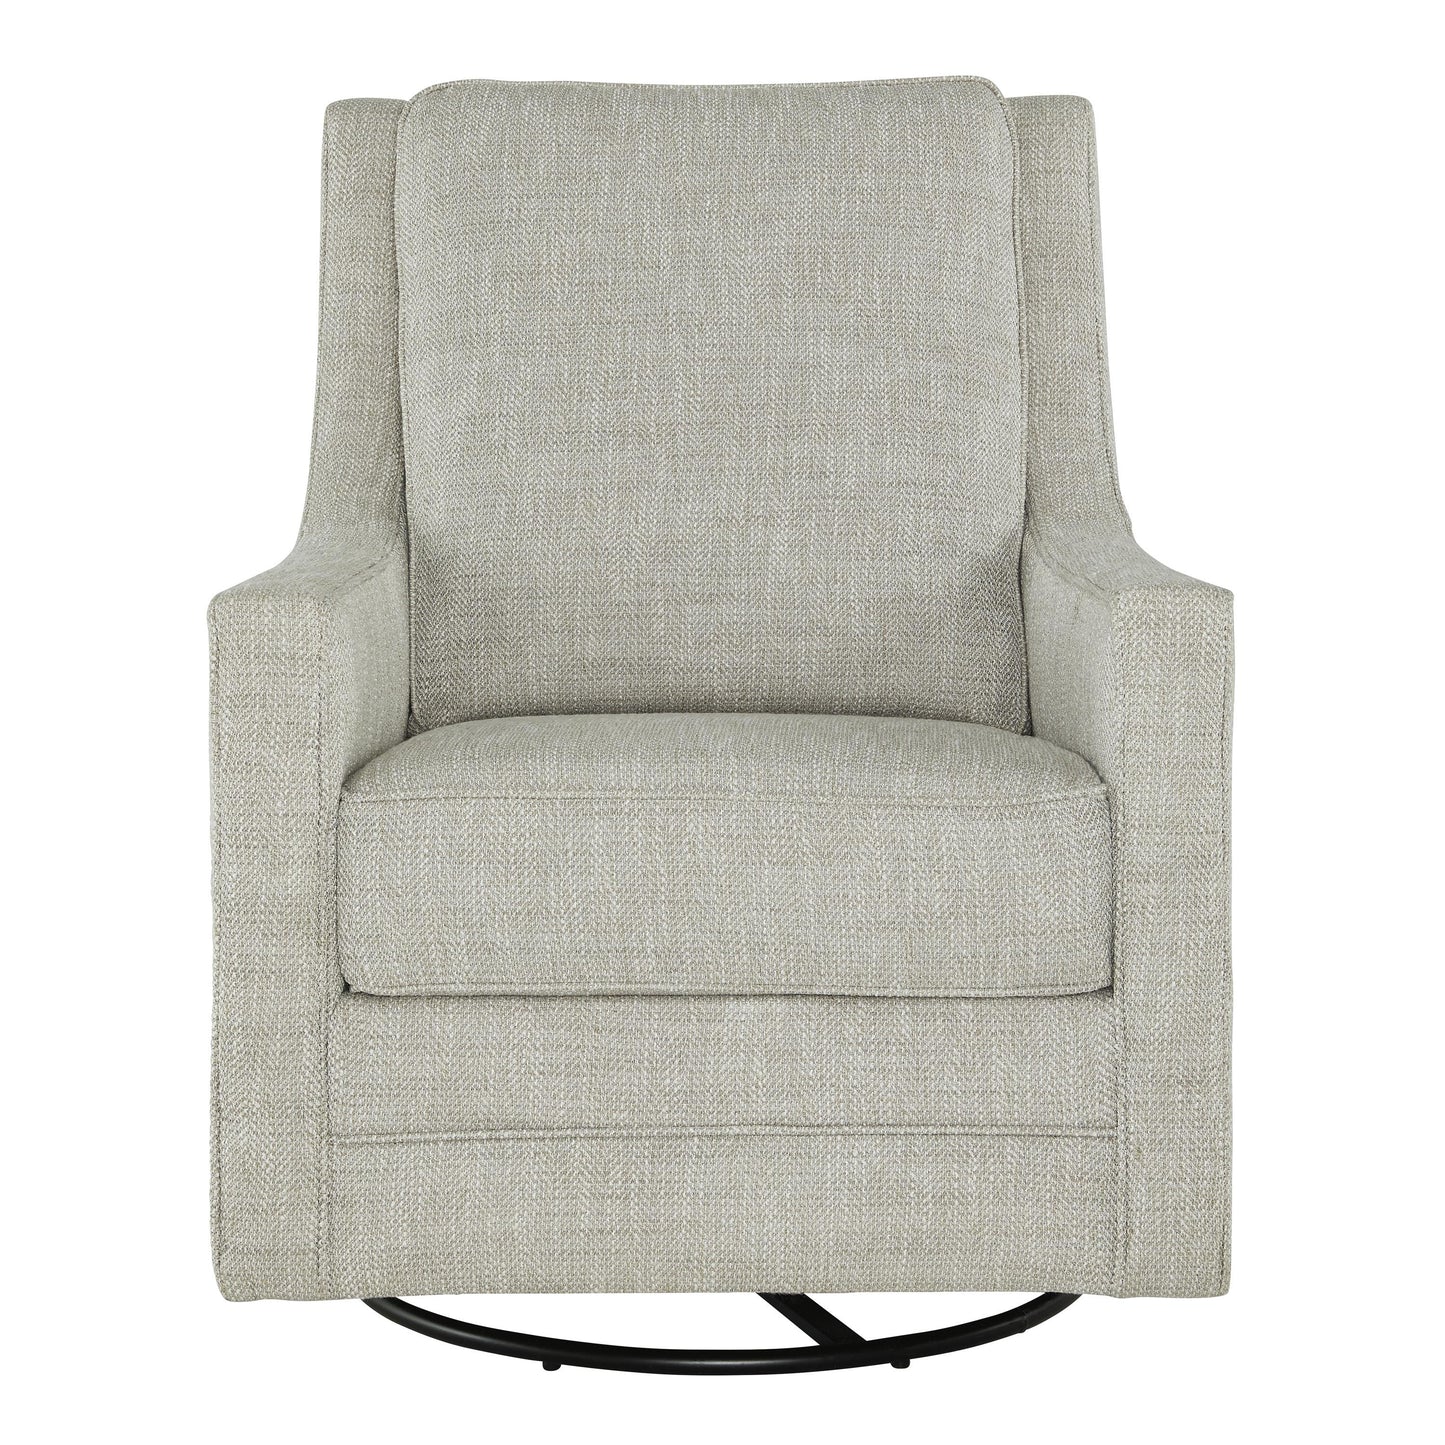 Signature Design by Ashley Kambria Swivel Glider Fabric Accent Chair A3000265 IMAGE 2